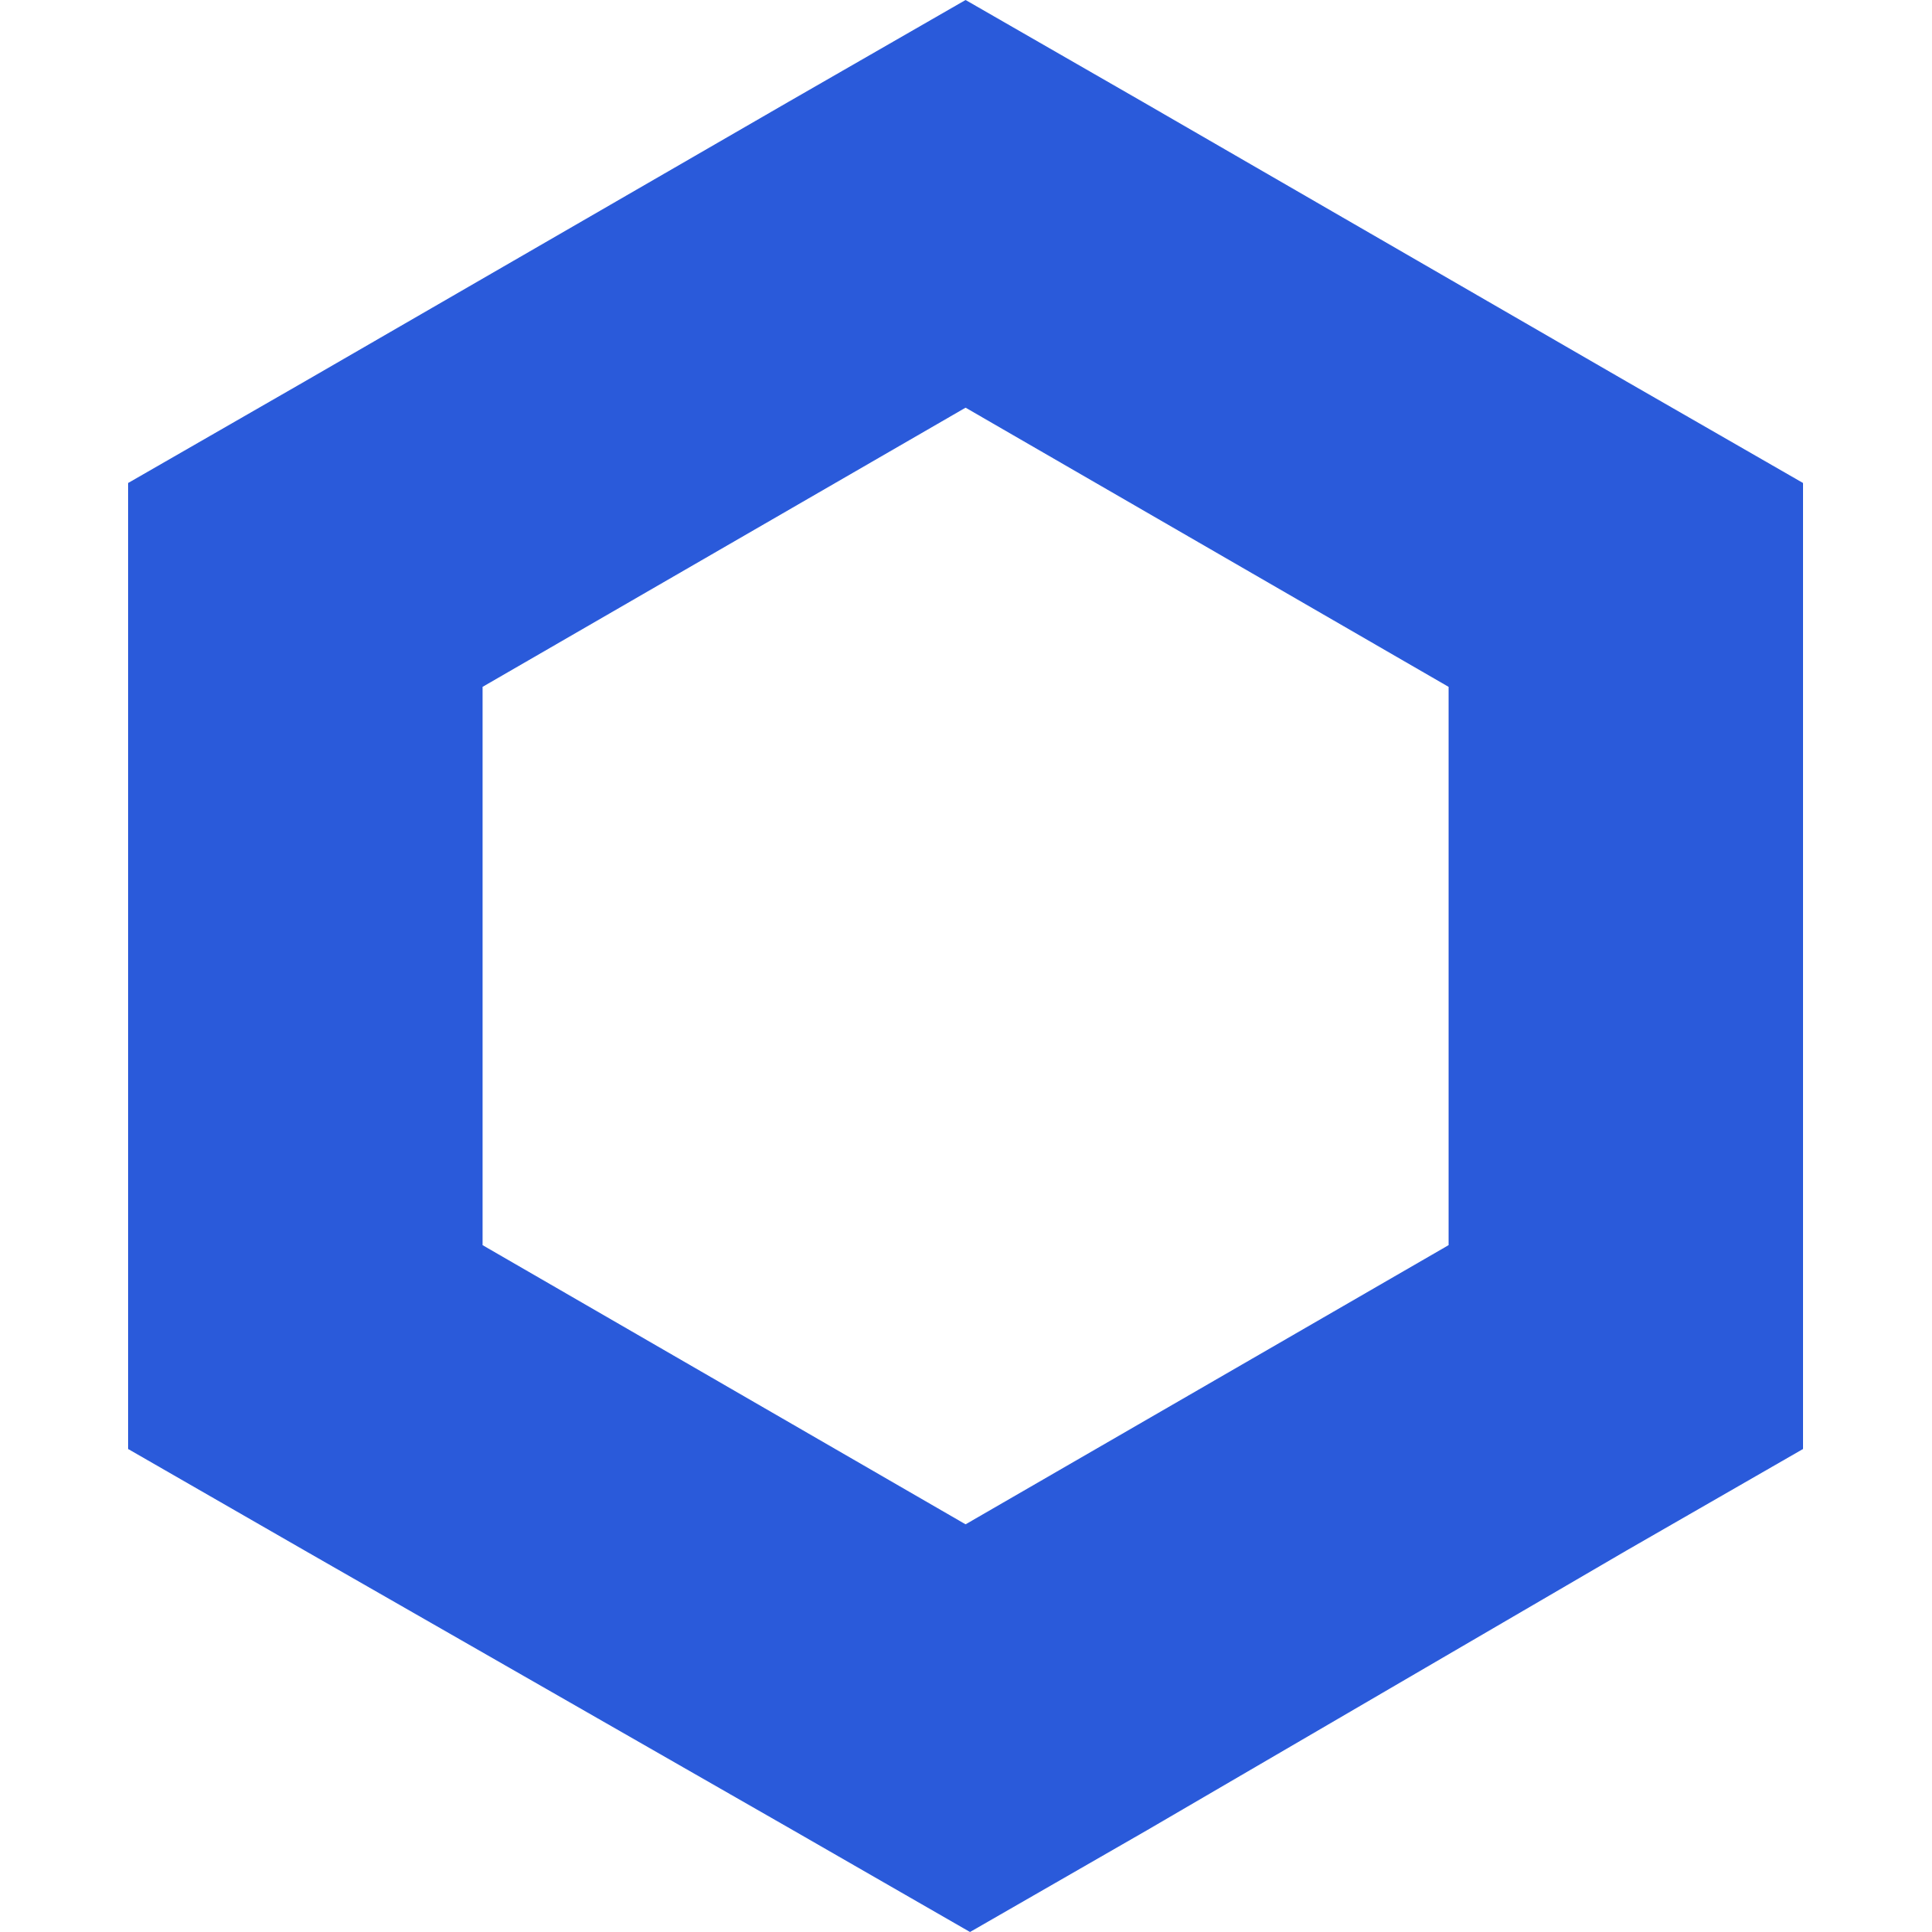 Chainlink LINK